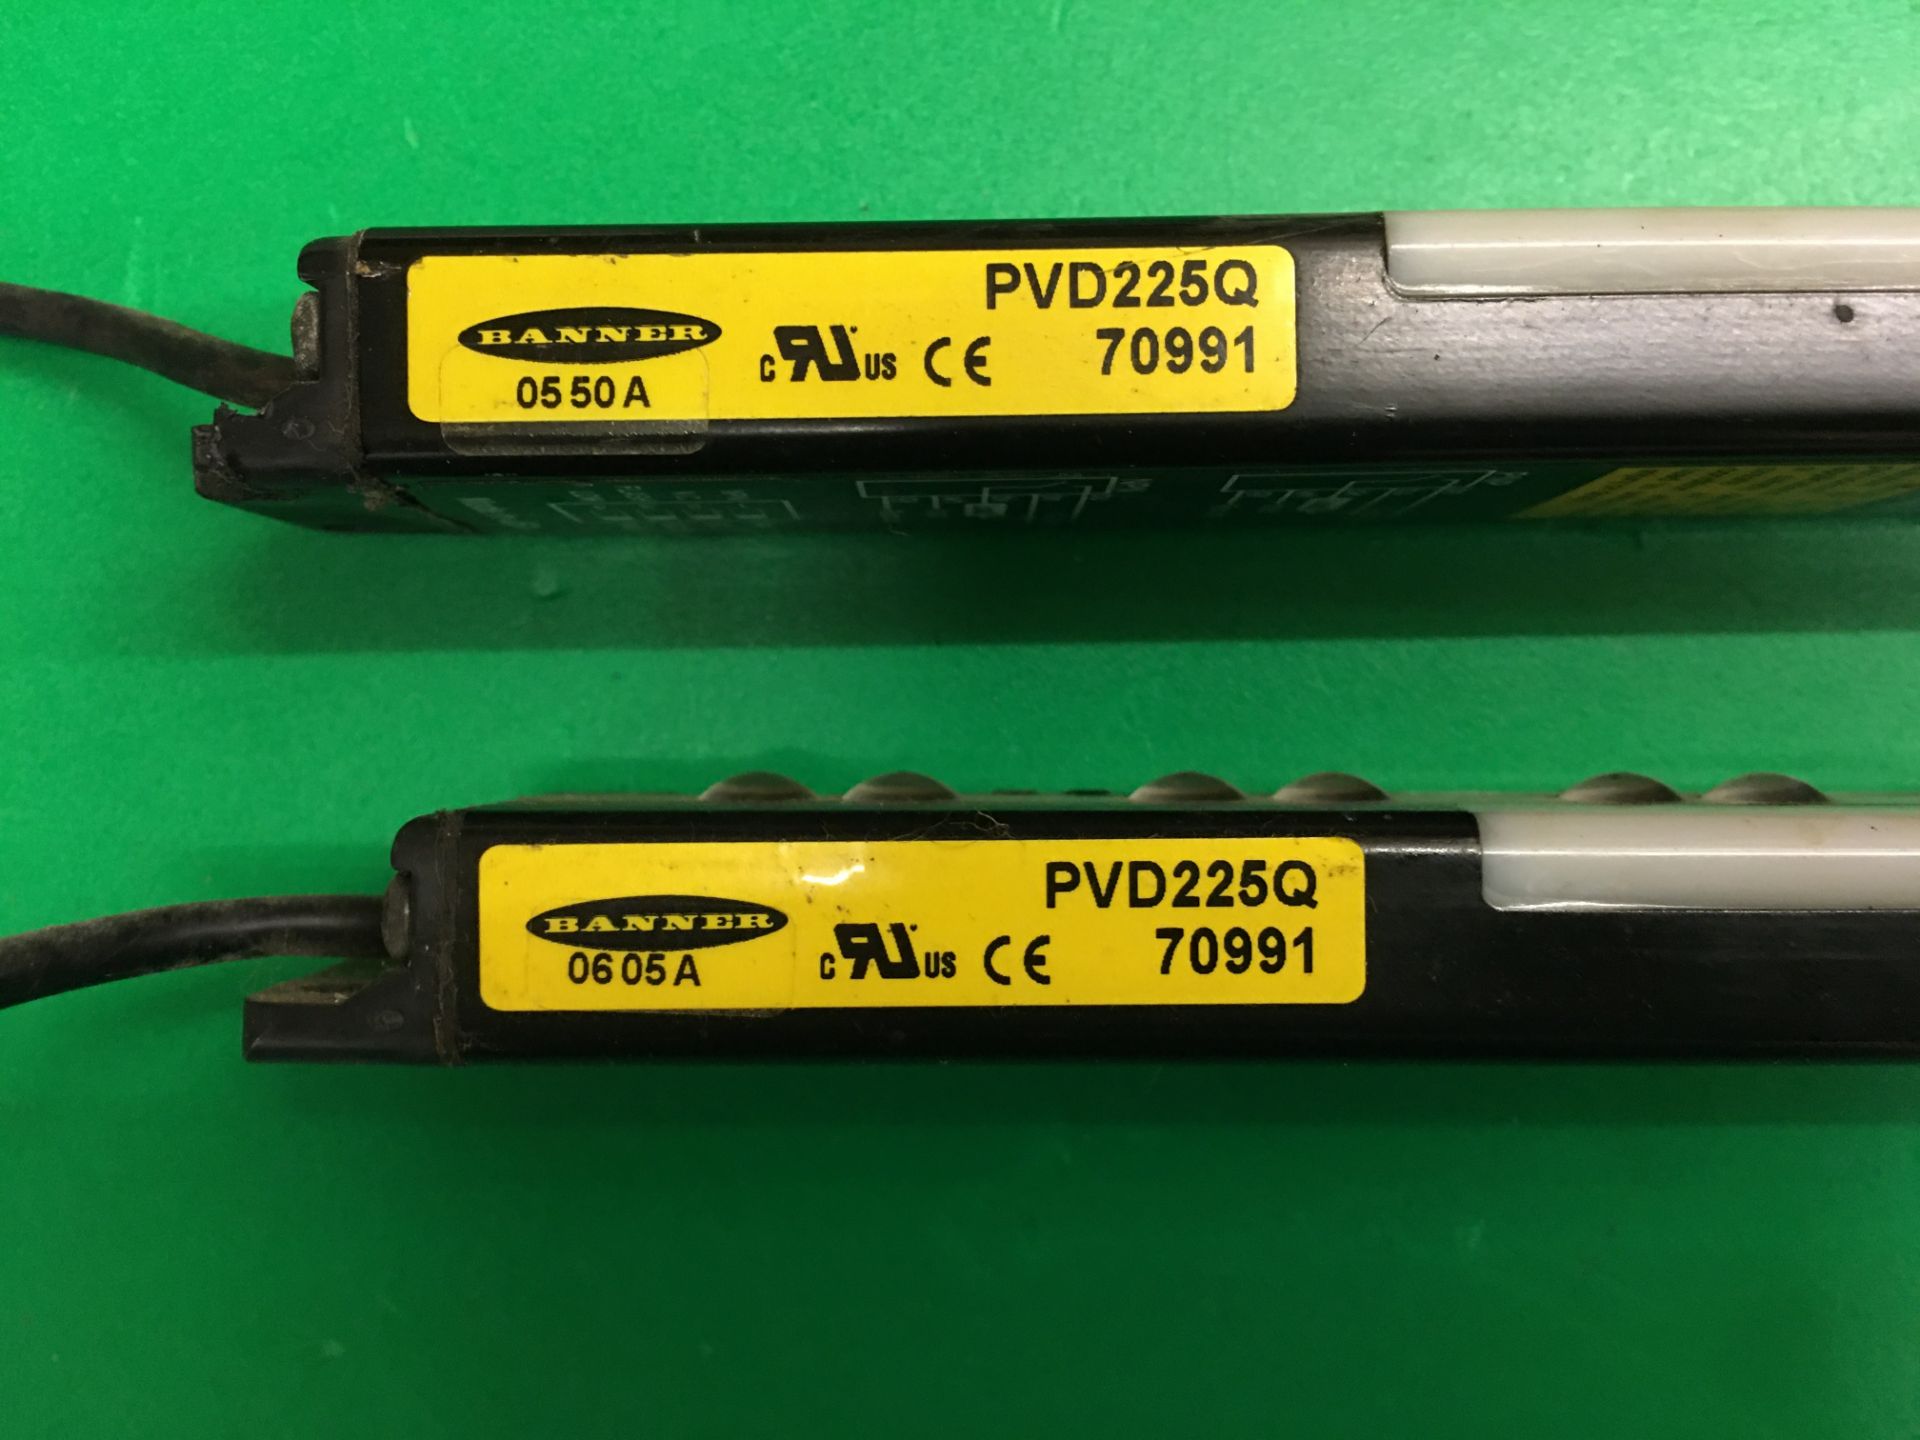 BANNER Engineering Photoelectric 2M QD 8 Channel / 5 Pin Pigtail, Lot of 2, Model PDV225Q, 12-30 VDC - Image 3 of 3